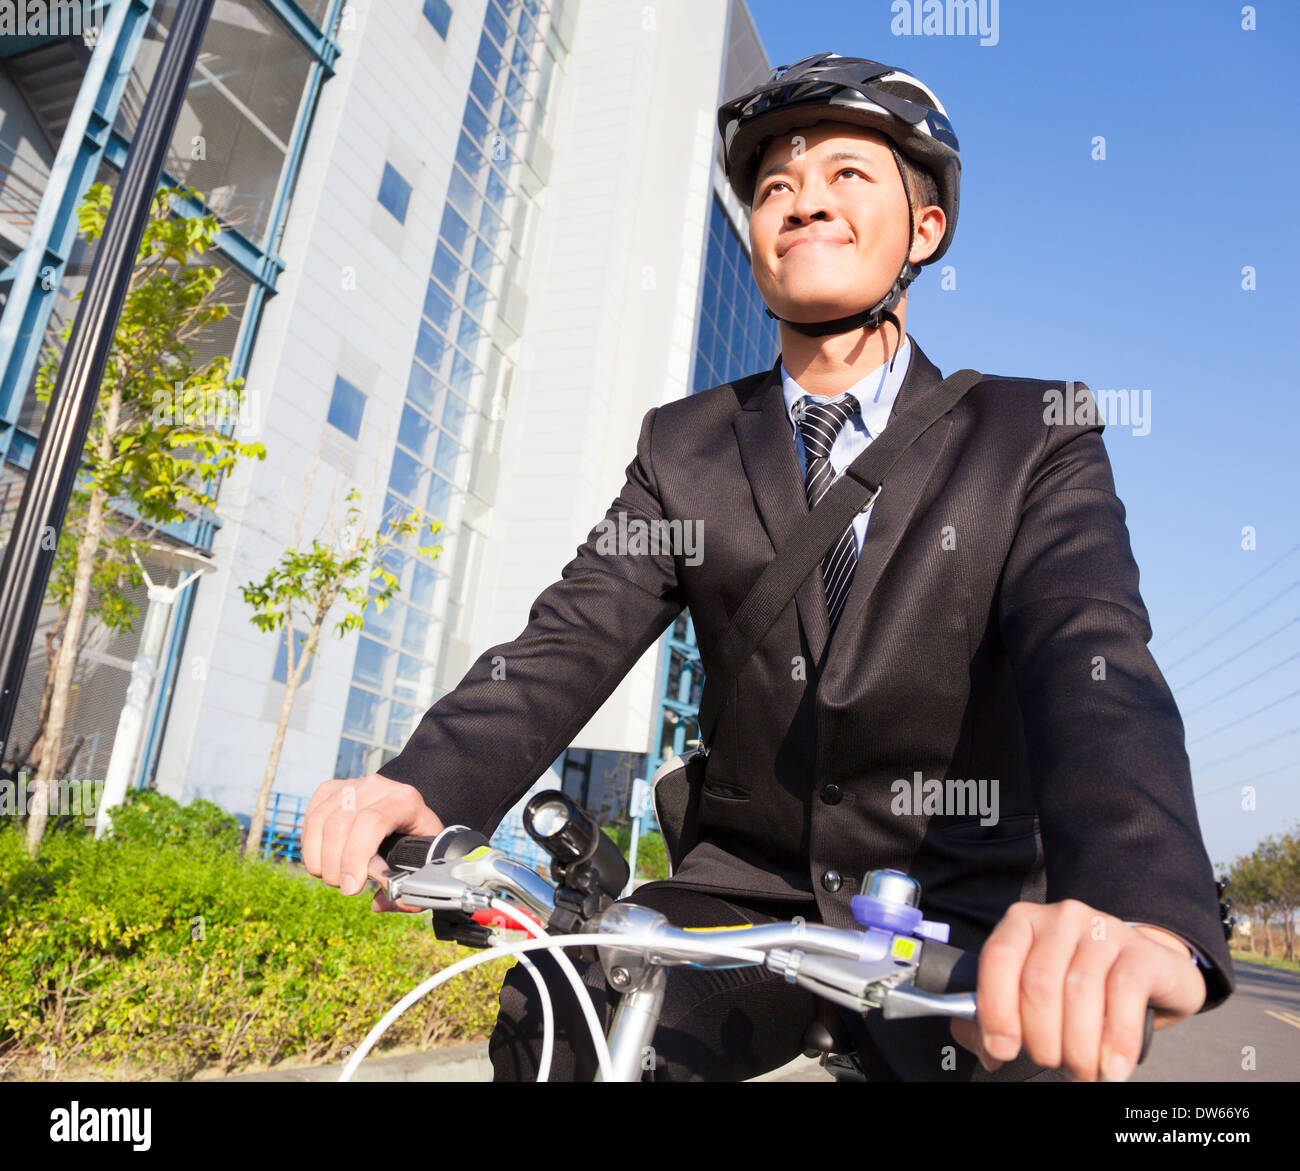 asian smiling businessman riding a bicycle to workplace Stock Photo